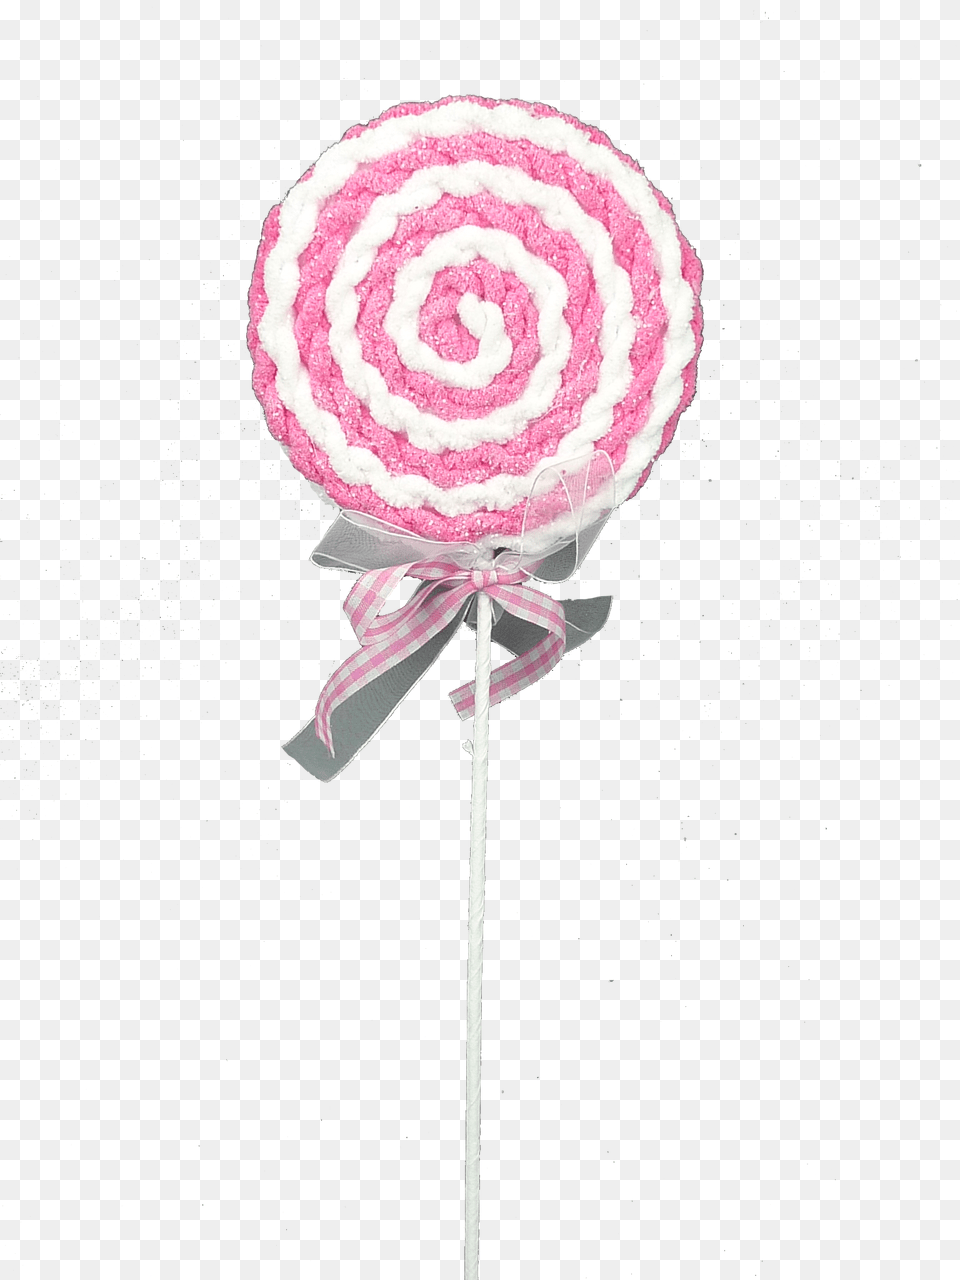 The Avengers, Candy, Food, Sweets, Lollipop Png